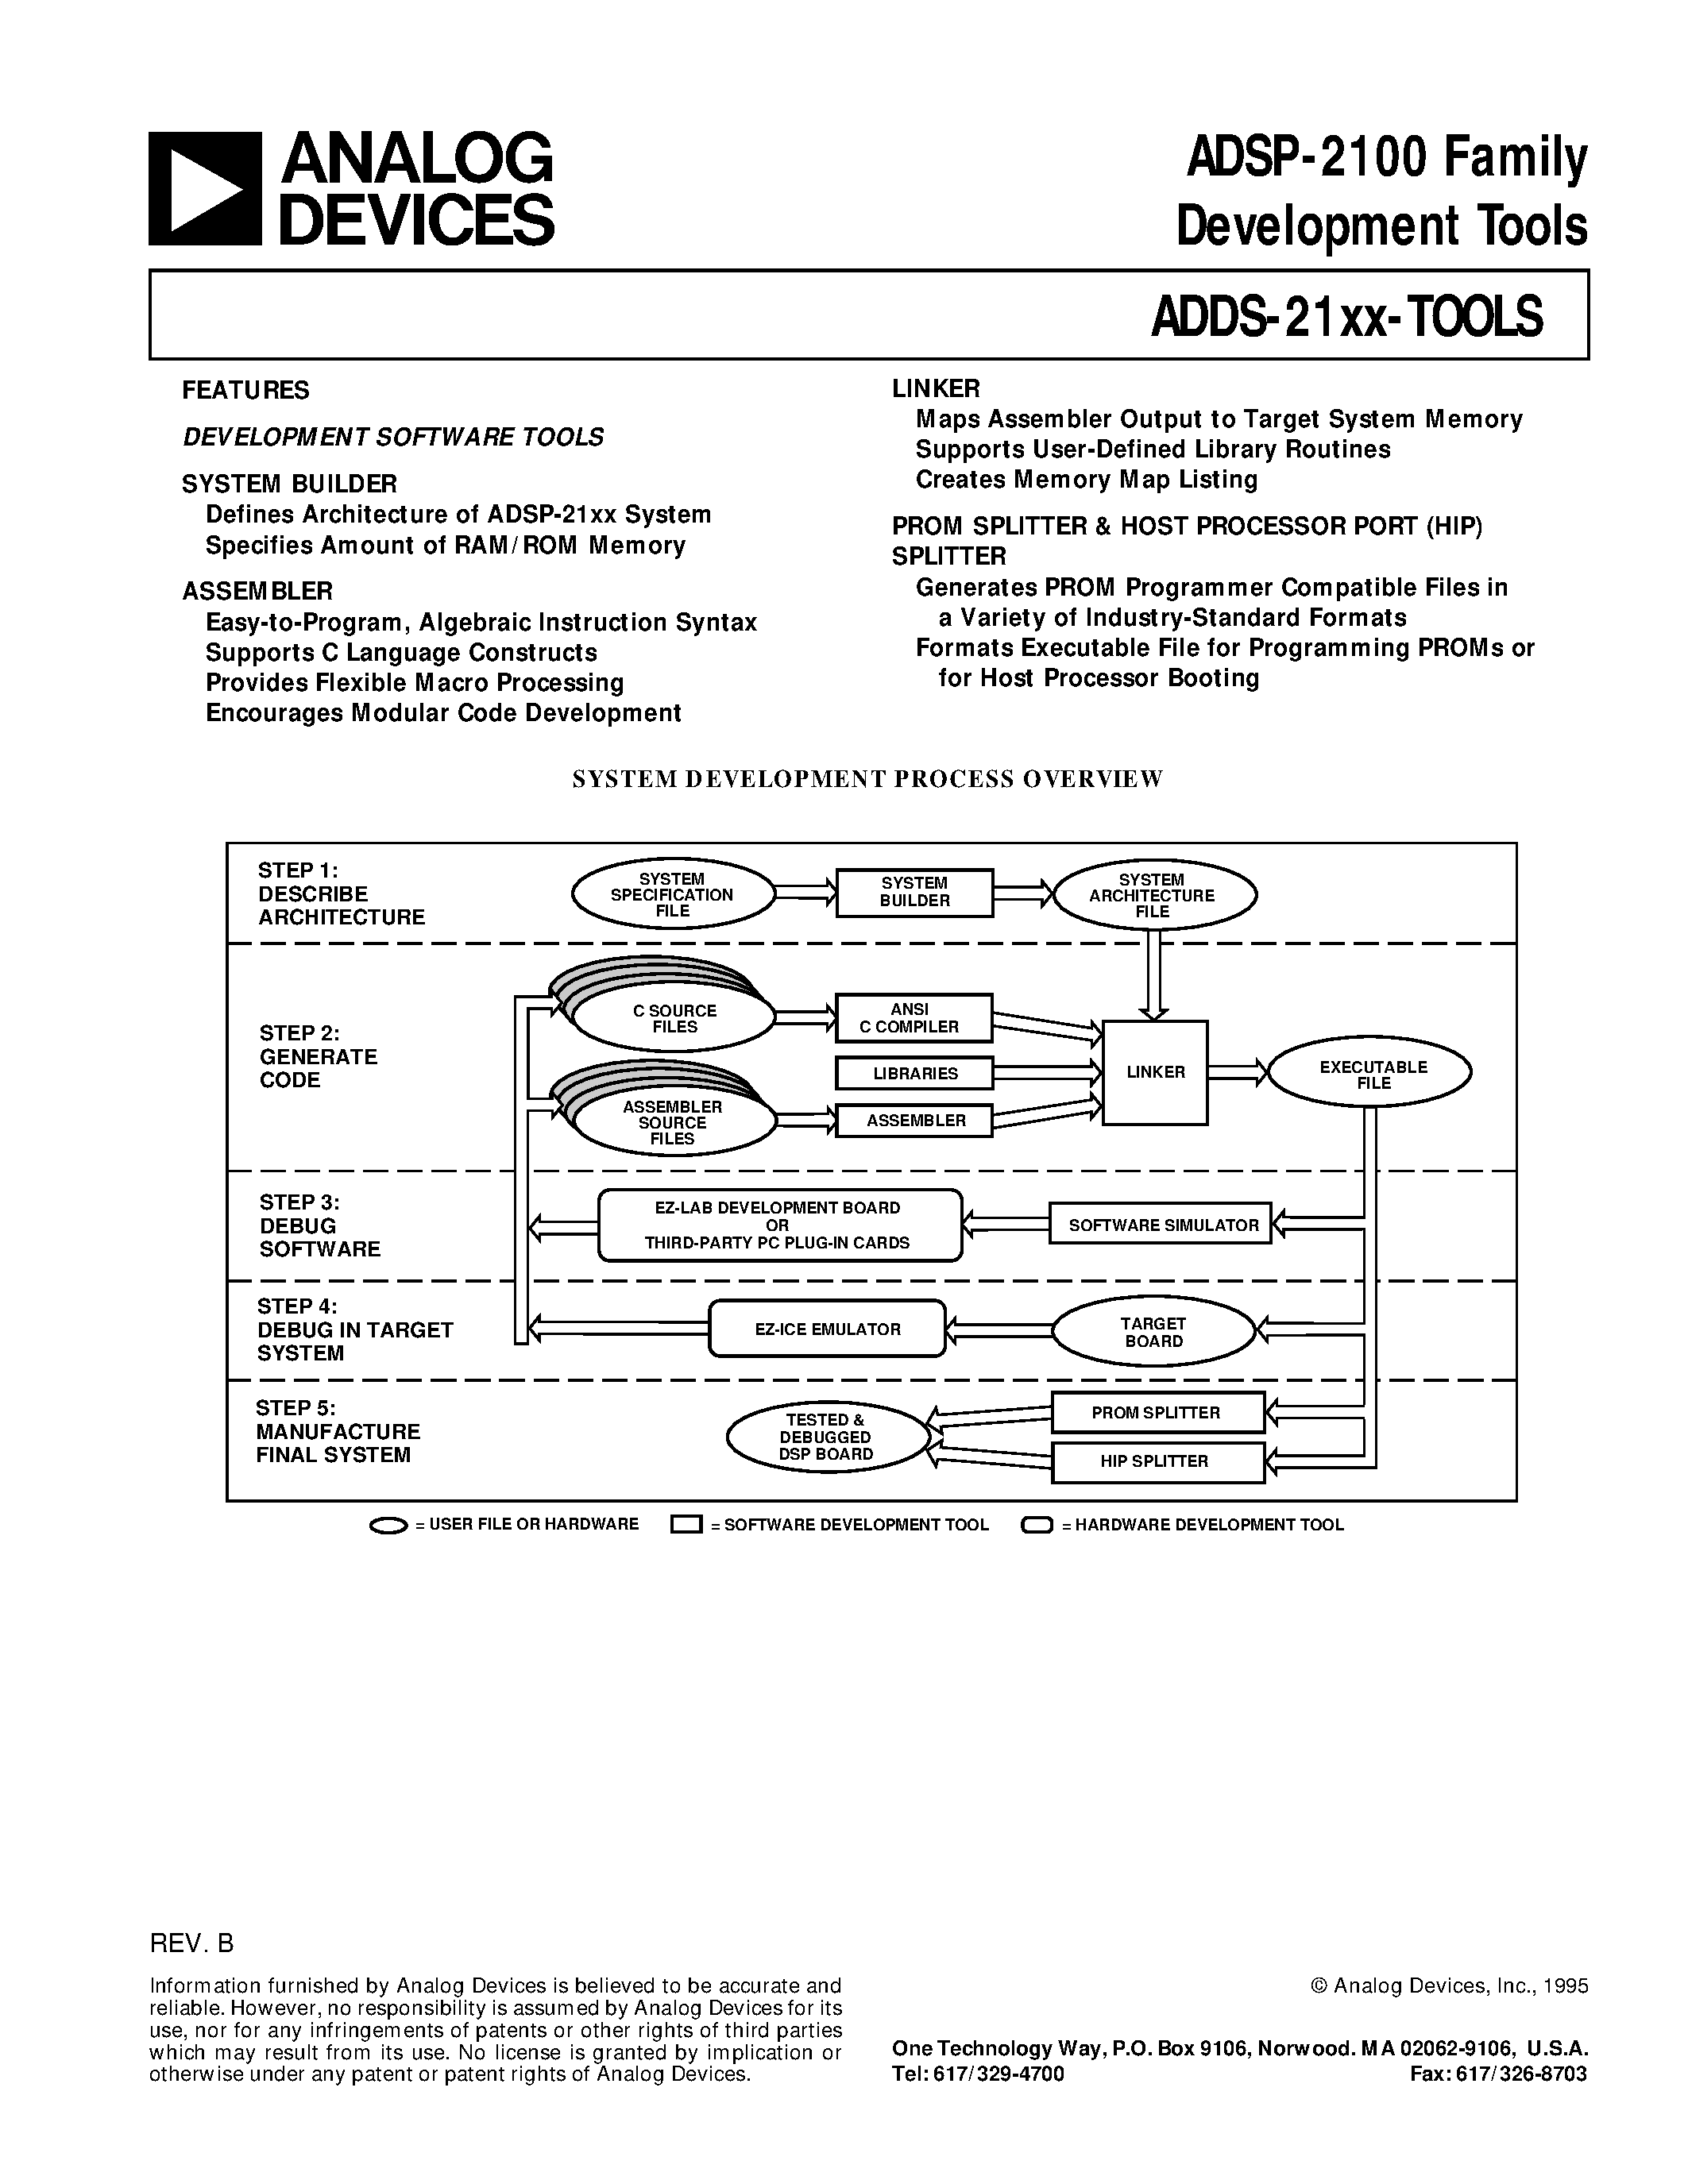 Datasheet ADDS-21XX-SW-SUN - ADSP-2100 Family Development Tools page 1